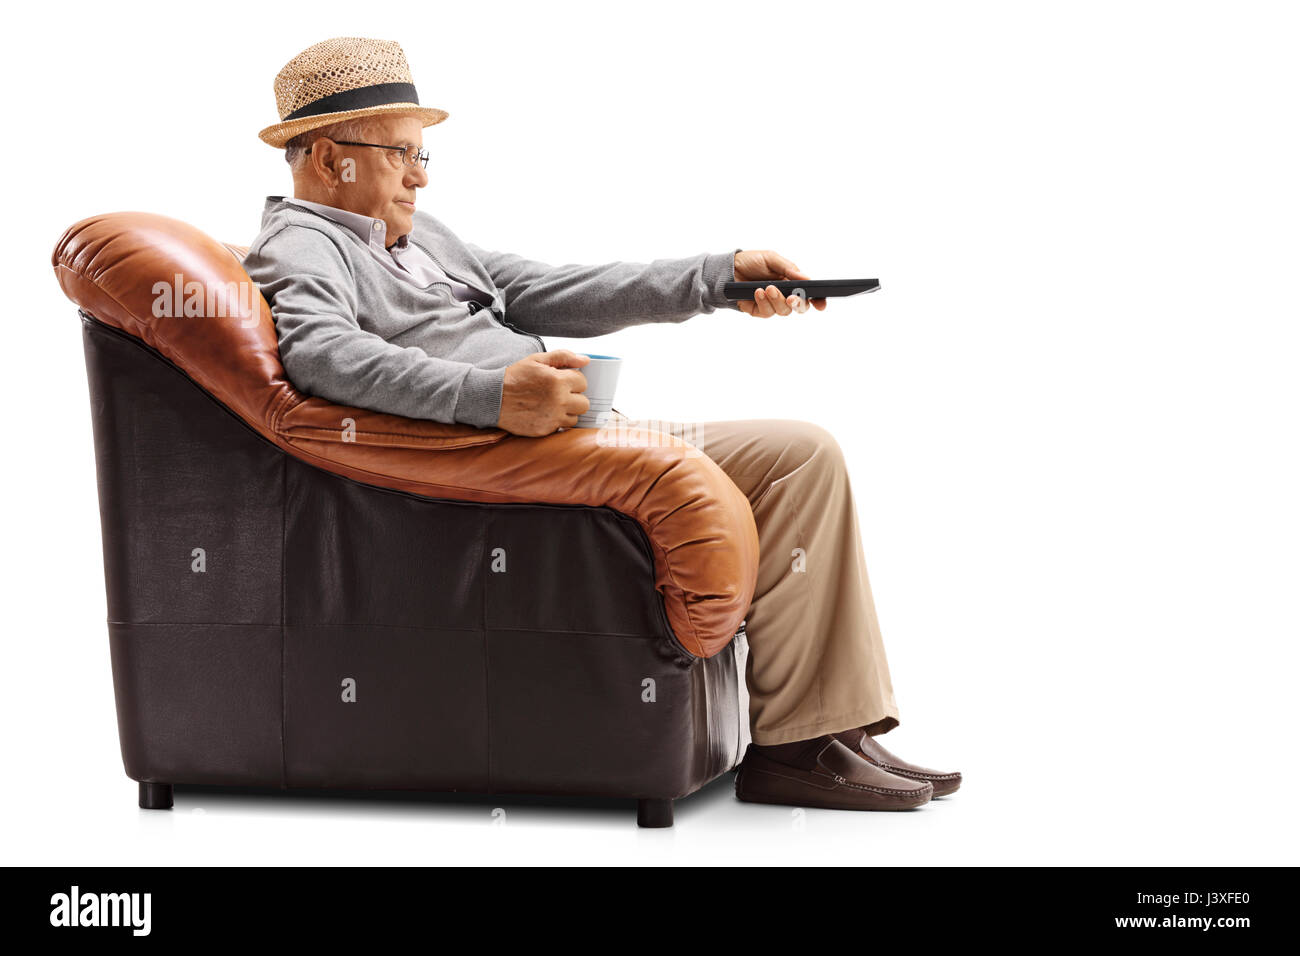 Bored elderly man holding a cup and a remote sitting in an armchair and watching television isolated on white background Stock Photo